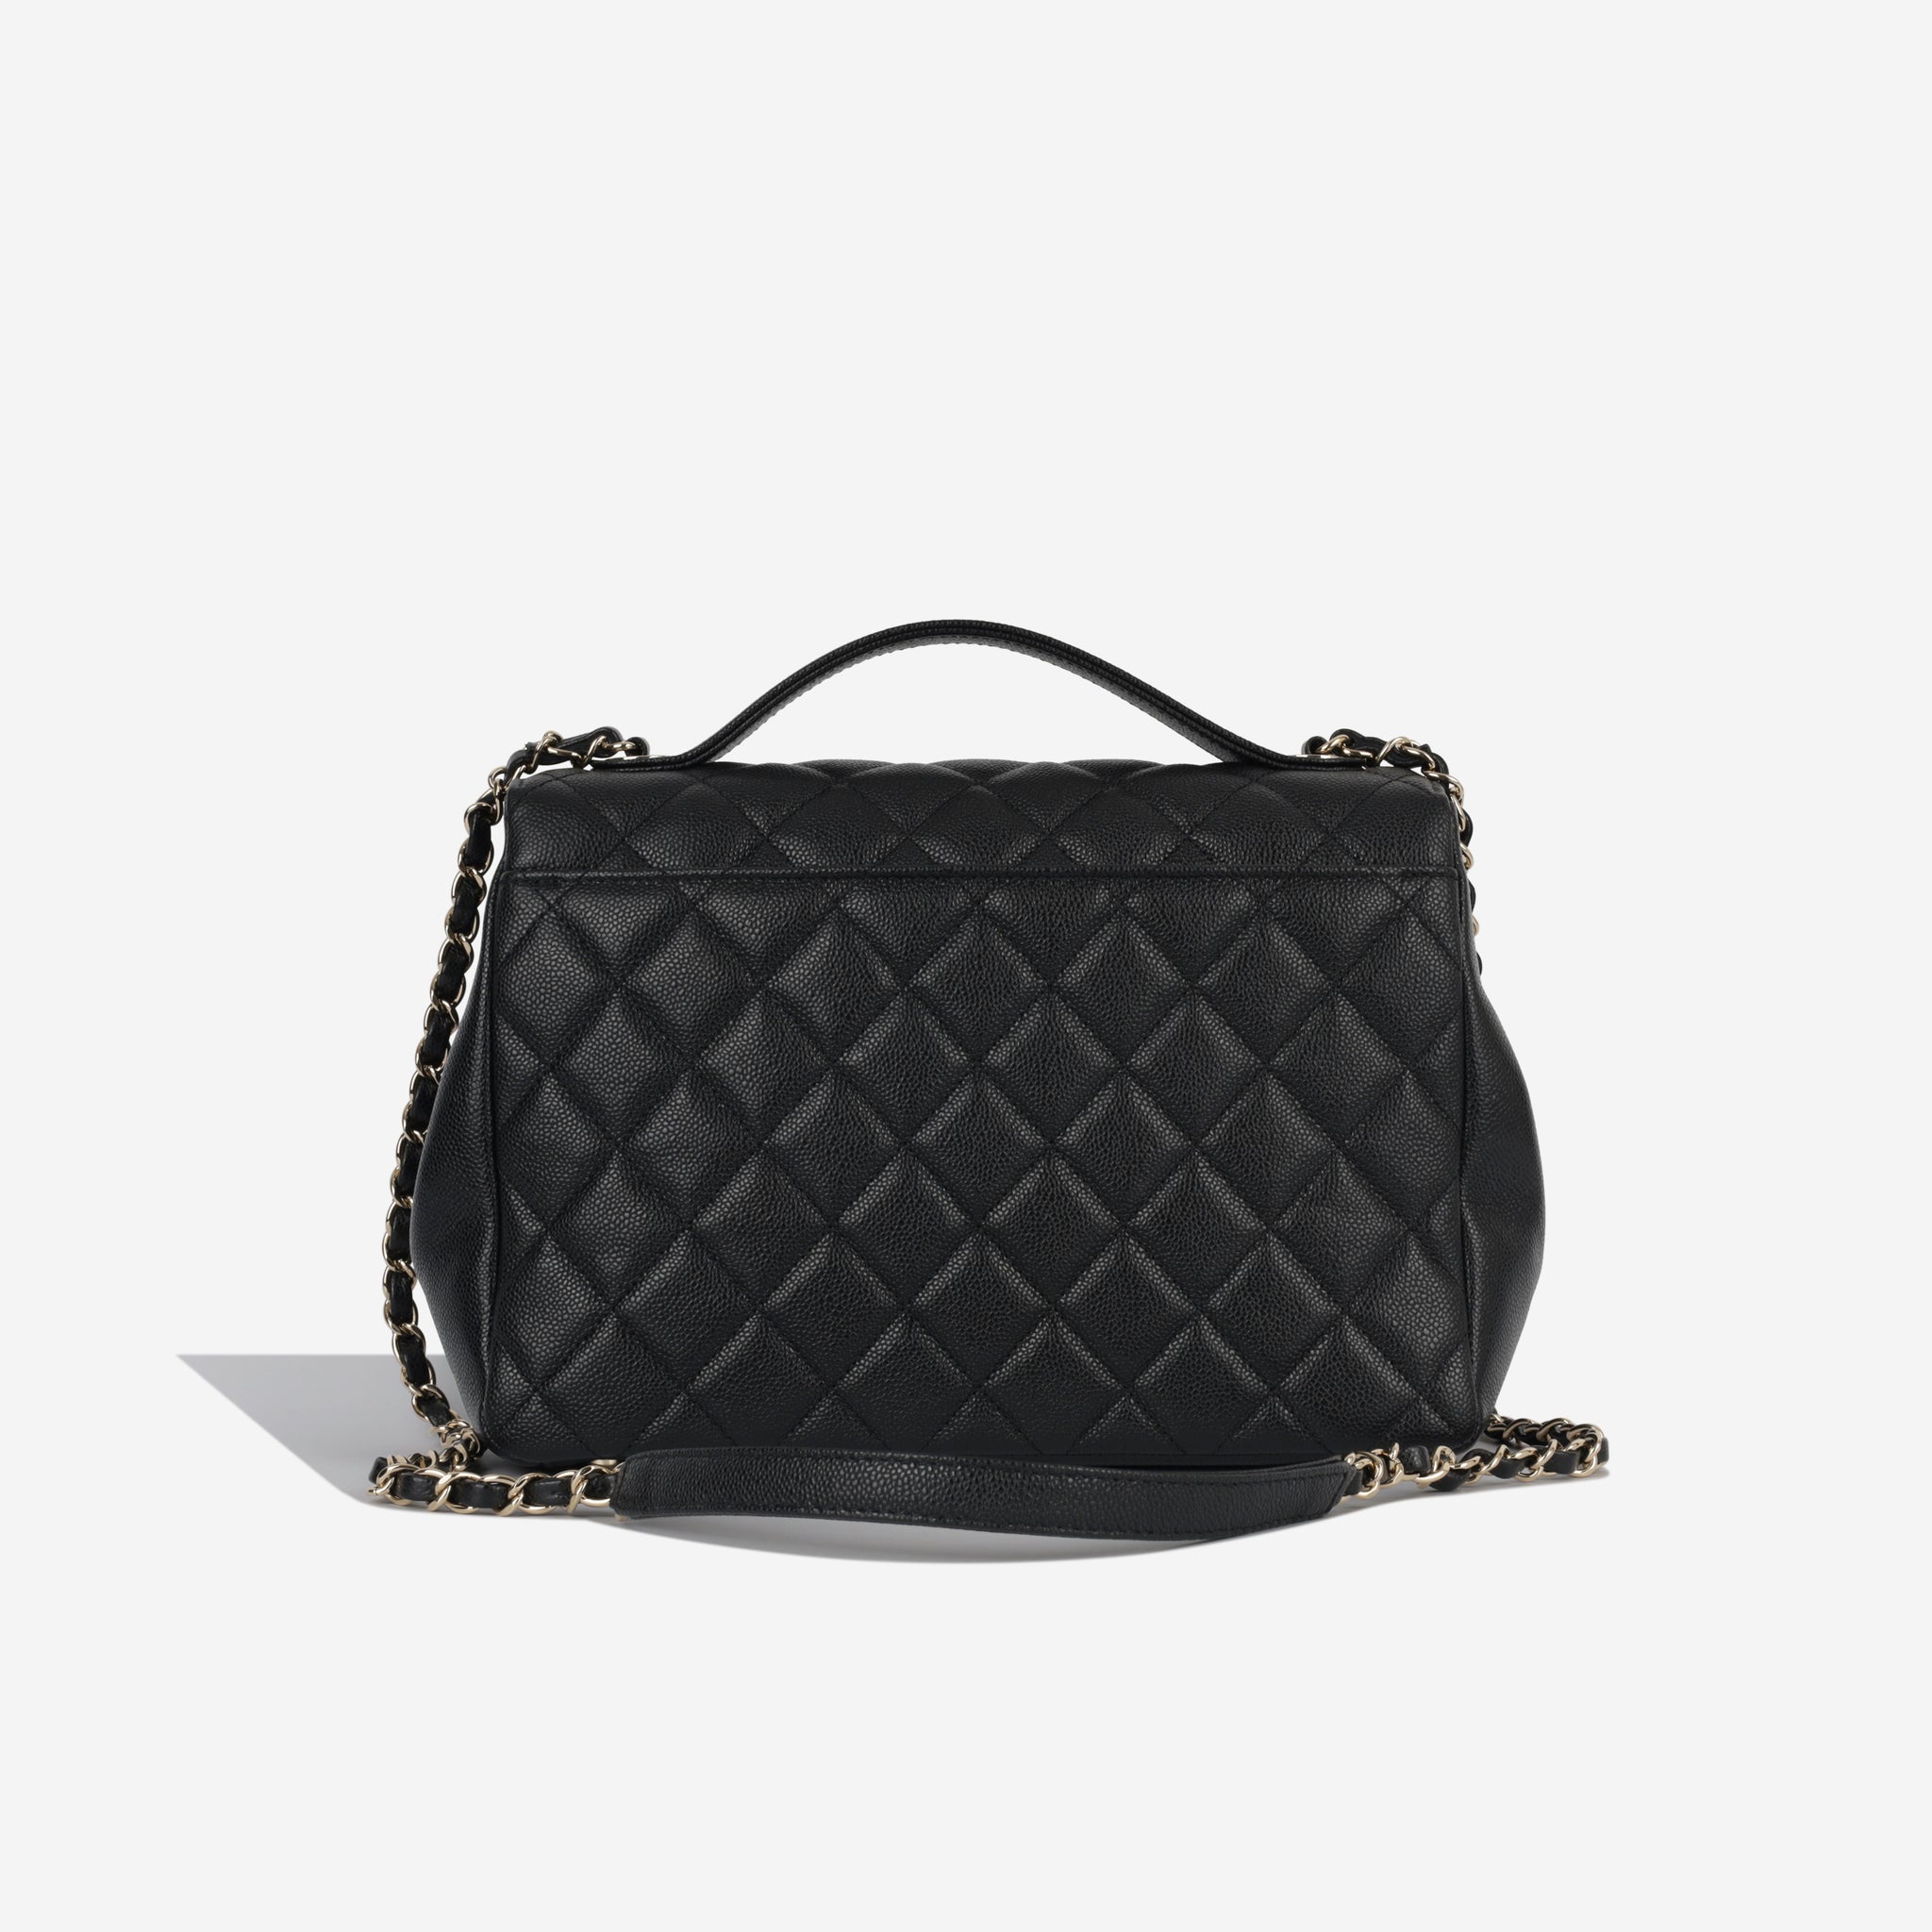 Naughtipidgins Nest - Chanel Business Affinity Large Flap Bag in